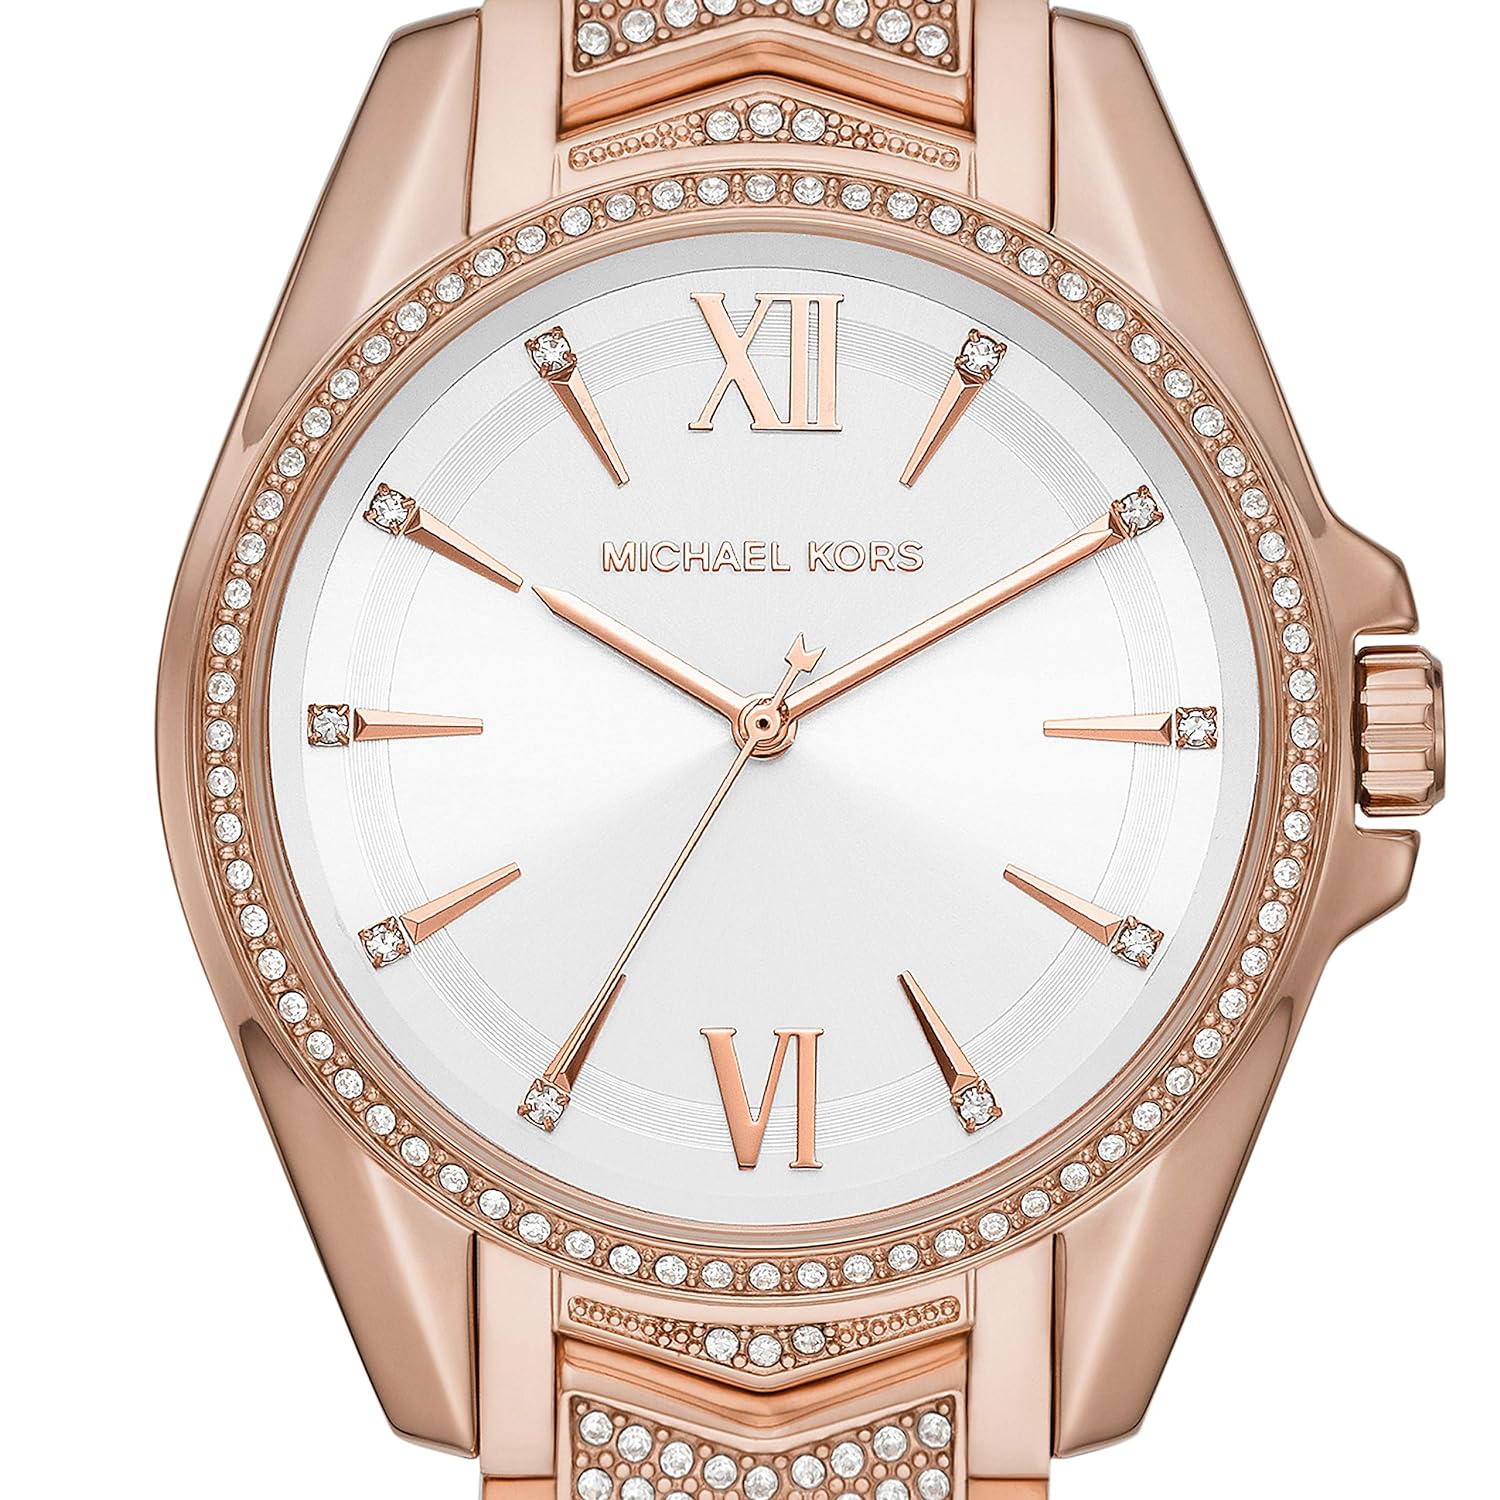 ĐỒNG HỒ NỮ MICHAEL KORS WHITNEY STAINLESS STEEL ANALOGUE WATCH MK6858 5